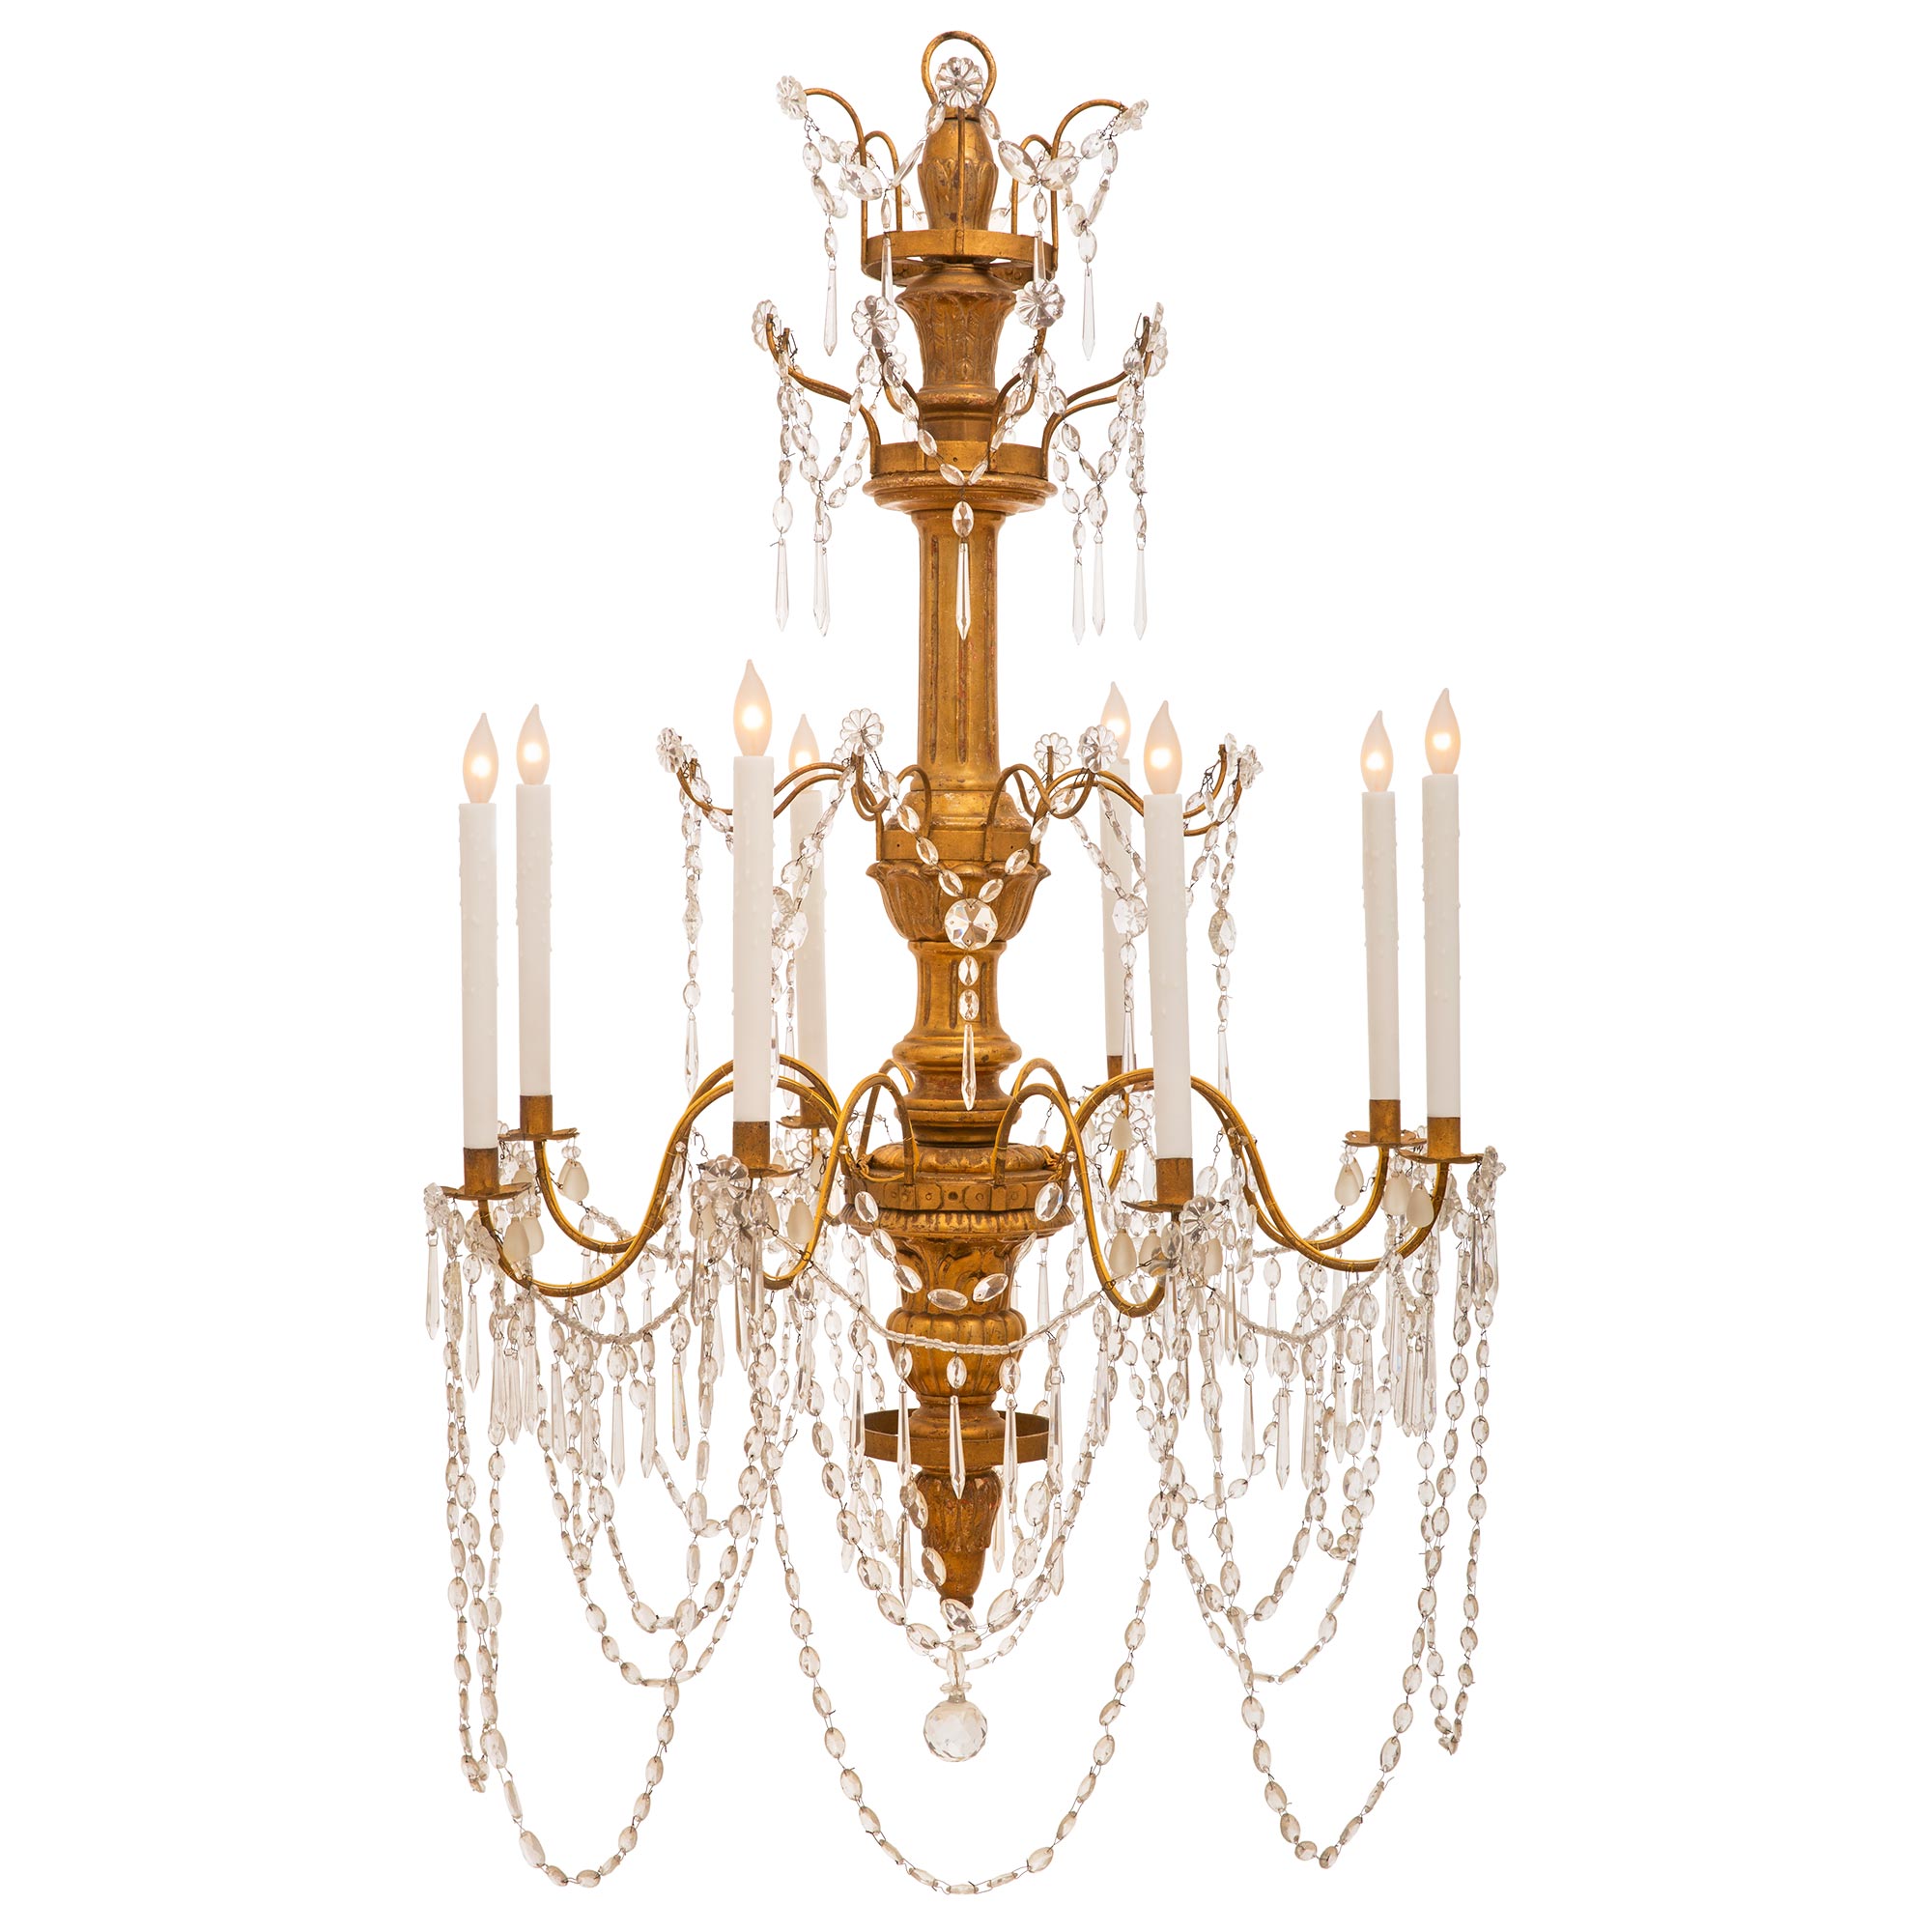 Italian Early 19th Century Giltwood and Crystal Chandelier For Sale